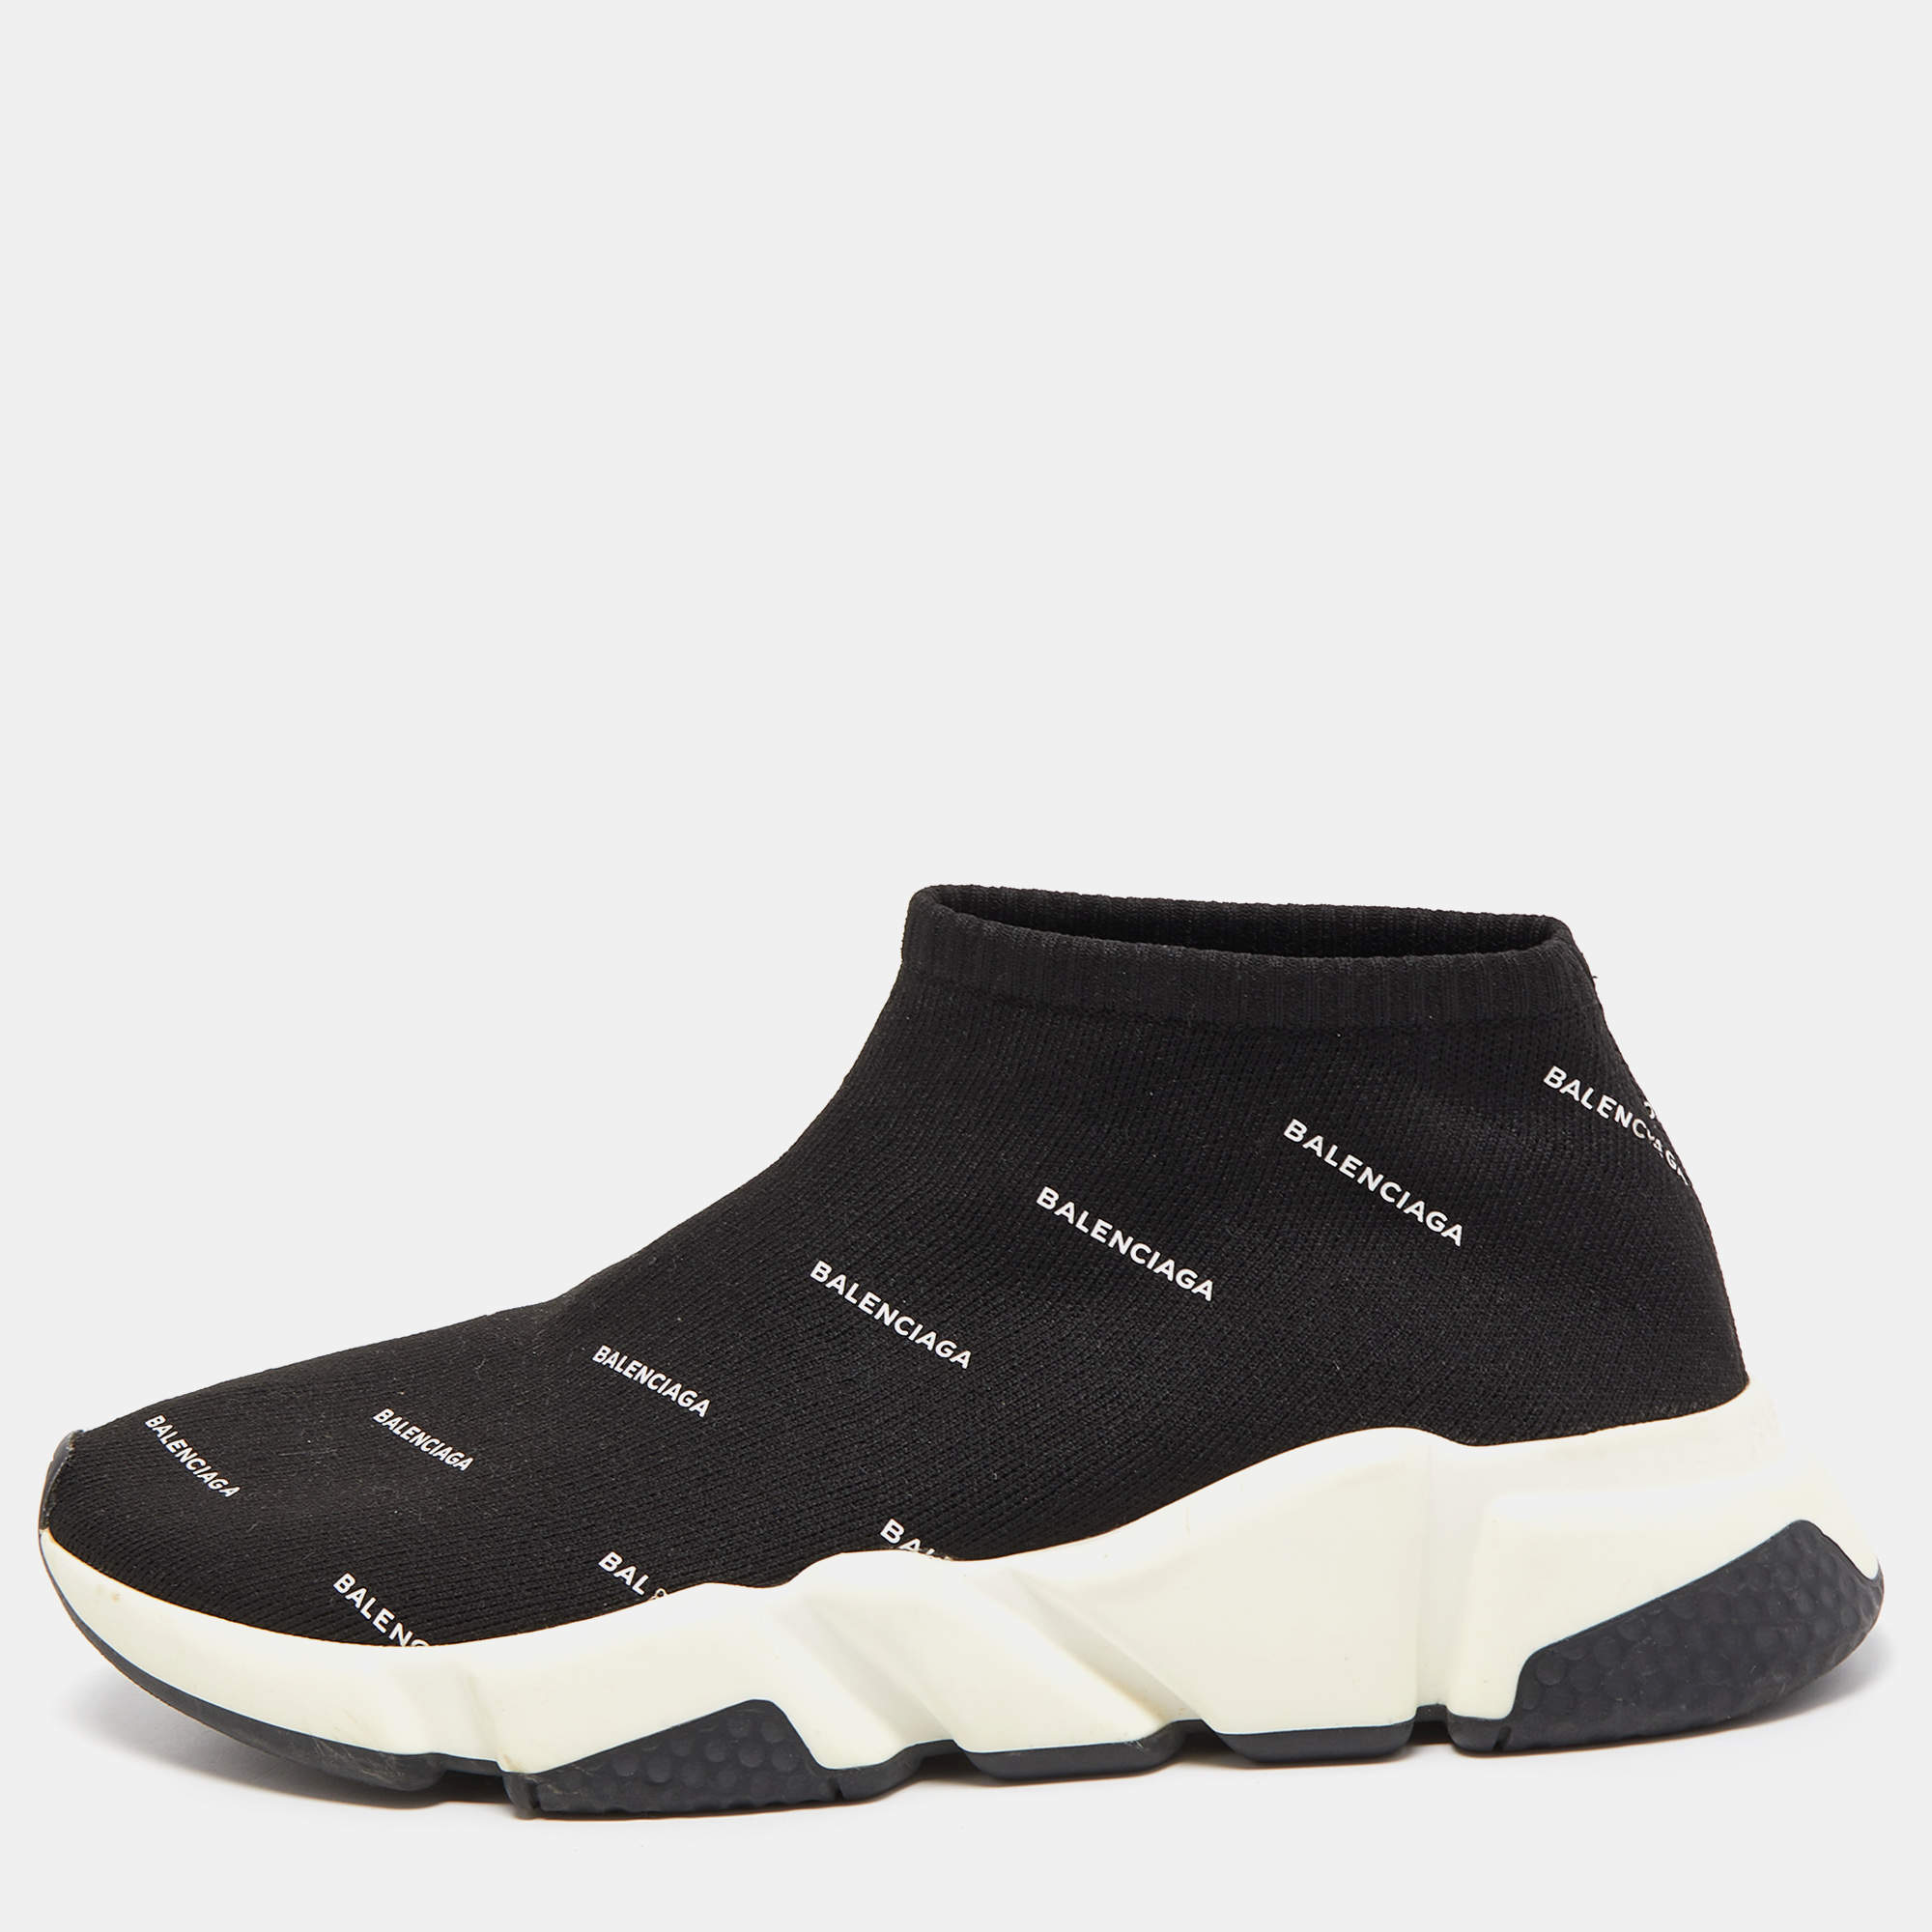 BALENCIAGA Speed Stretchknit Mid 477289w05g01004 Unisex Basketball Shoes  For Men  Buy BALENCIAGA Speed Stretchknit Mid 477289w05g01004 Unisex Basketball  Shoes For Men Online at Best Price  Shop Online for Footwears in